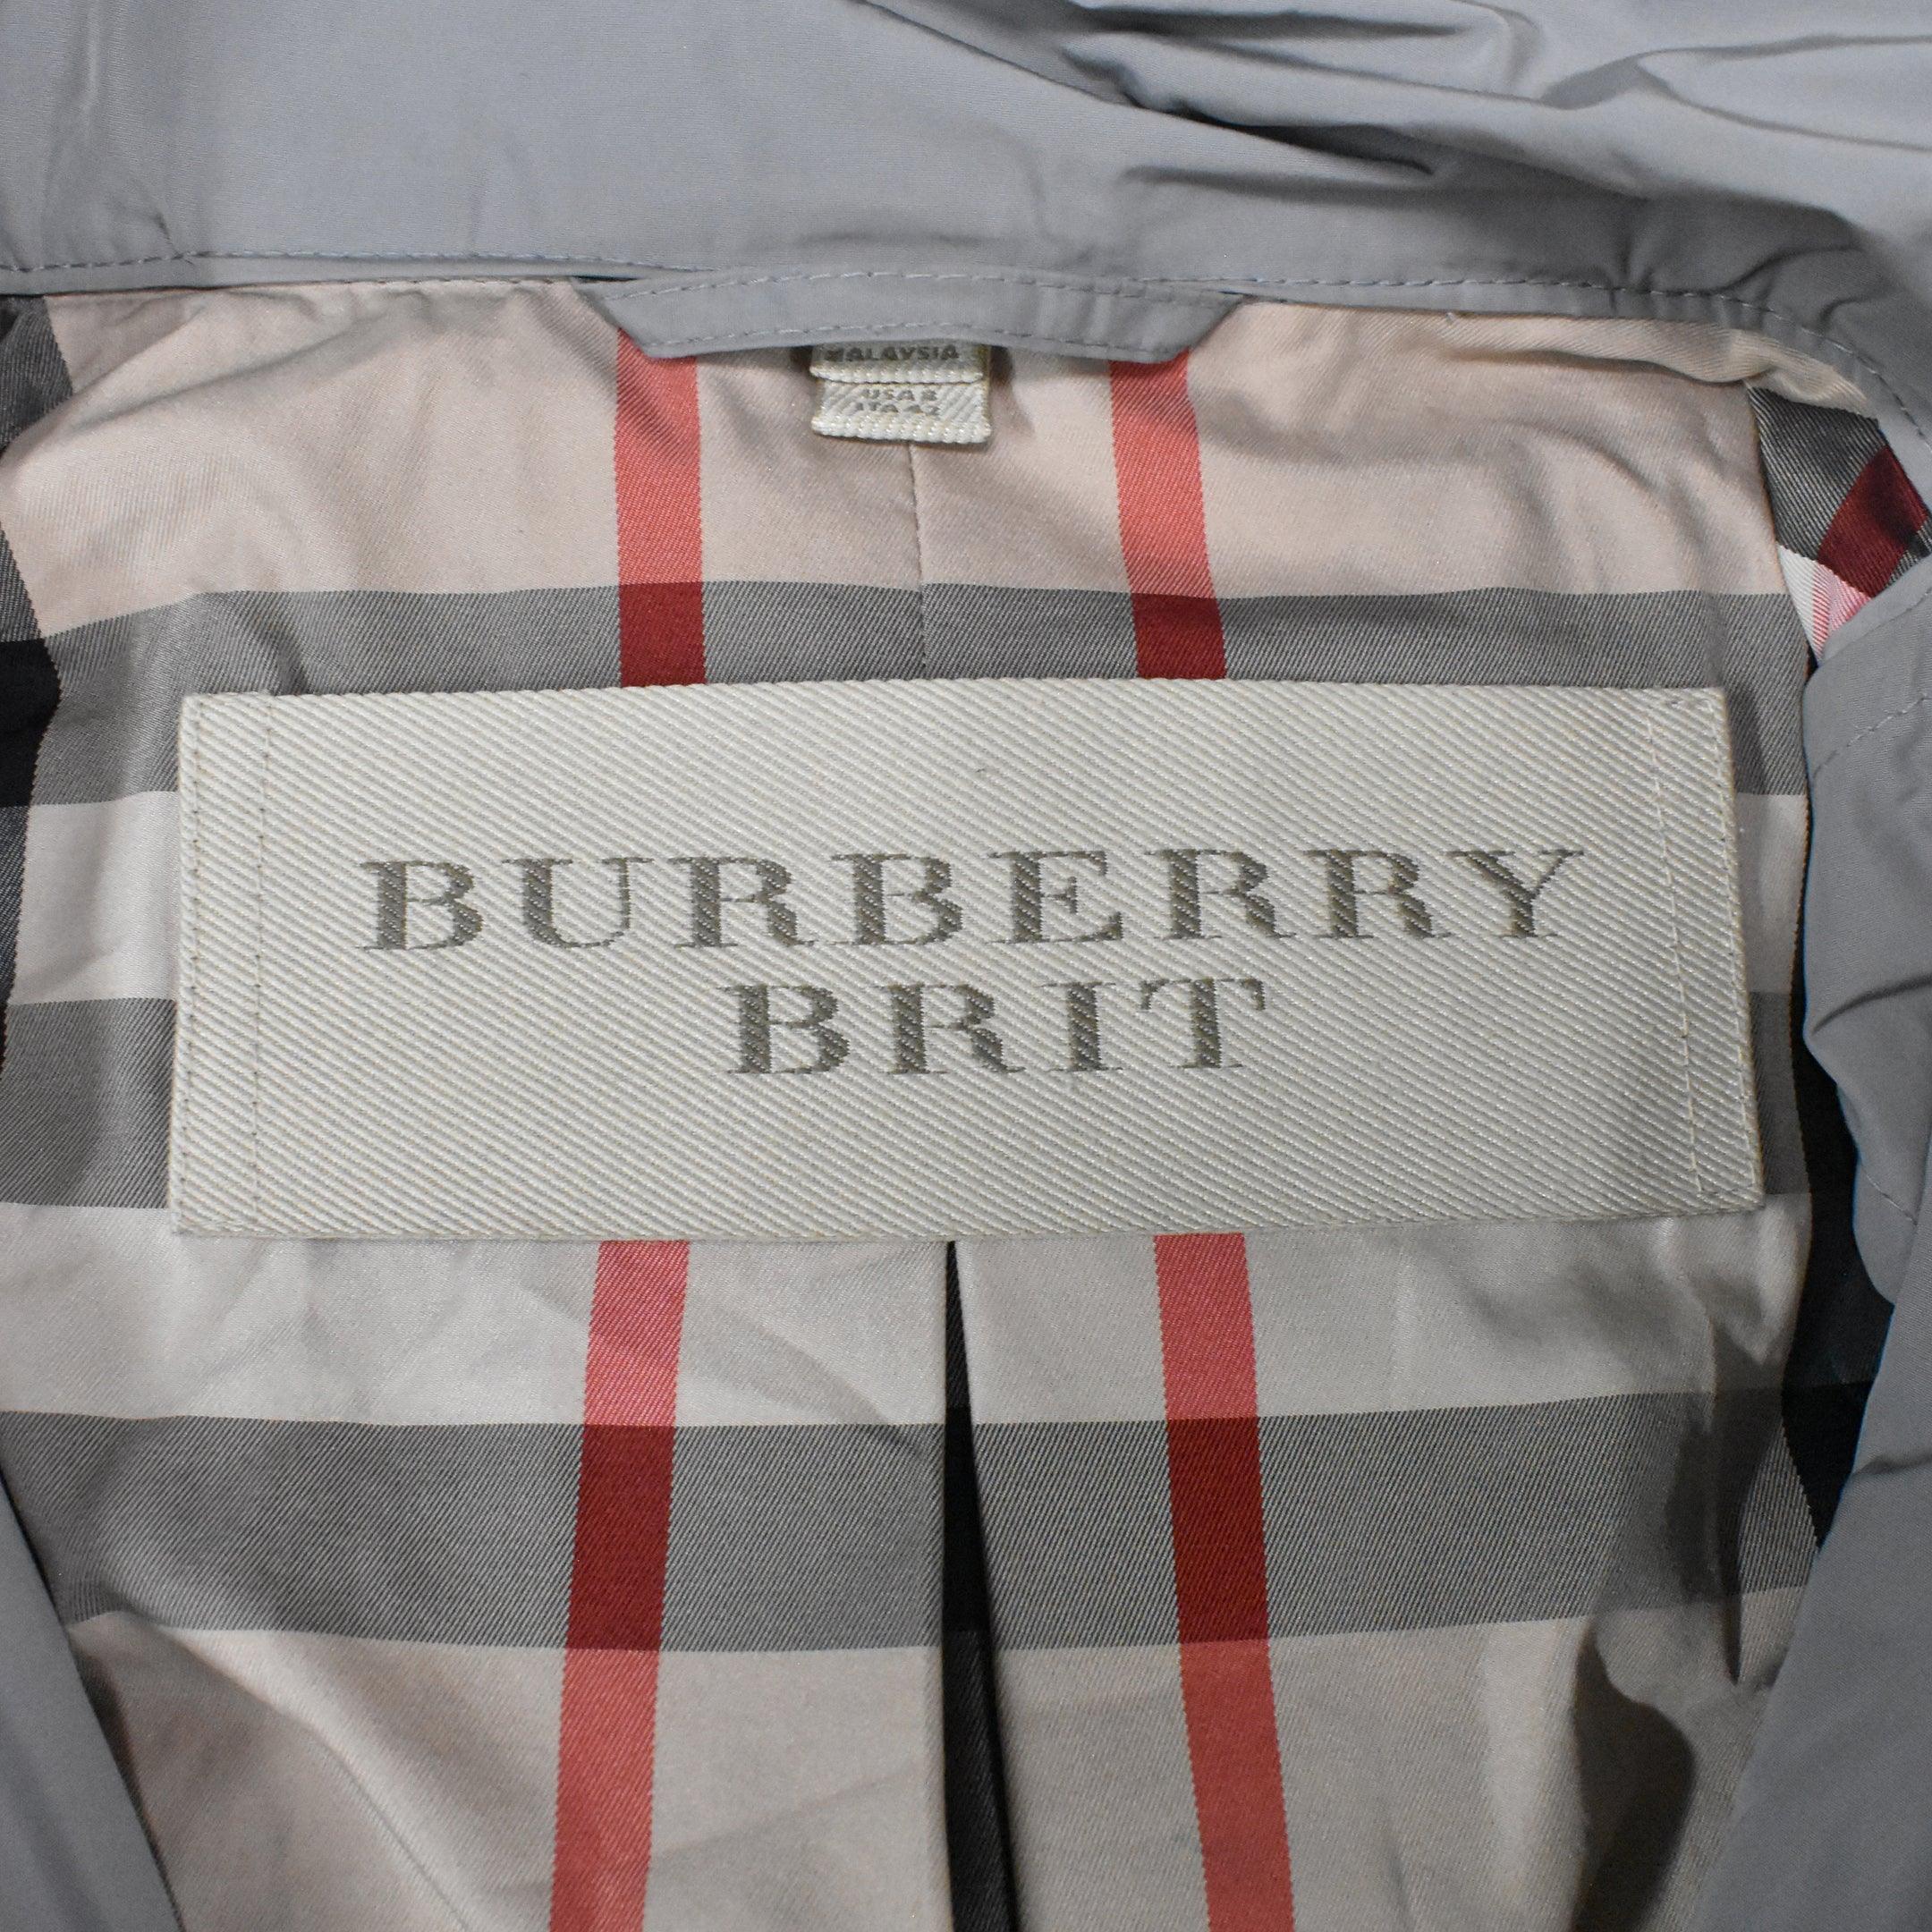 Burberry Brit Jacket - Women's 8 - Fashionably Yours